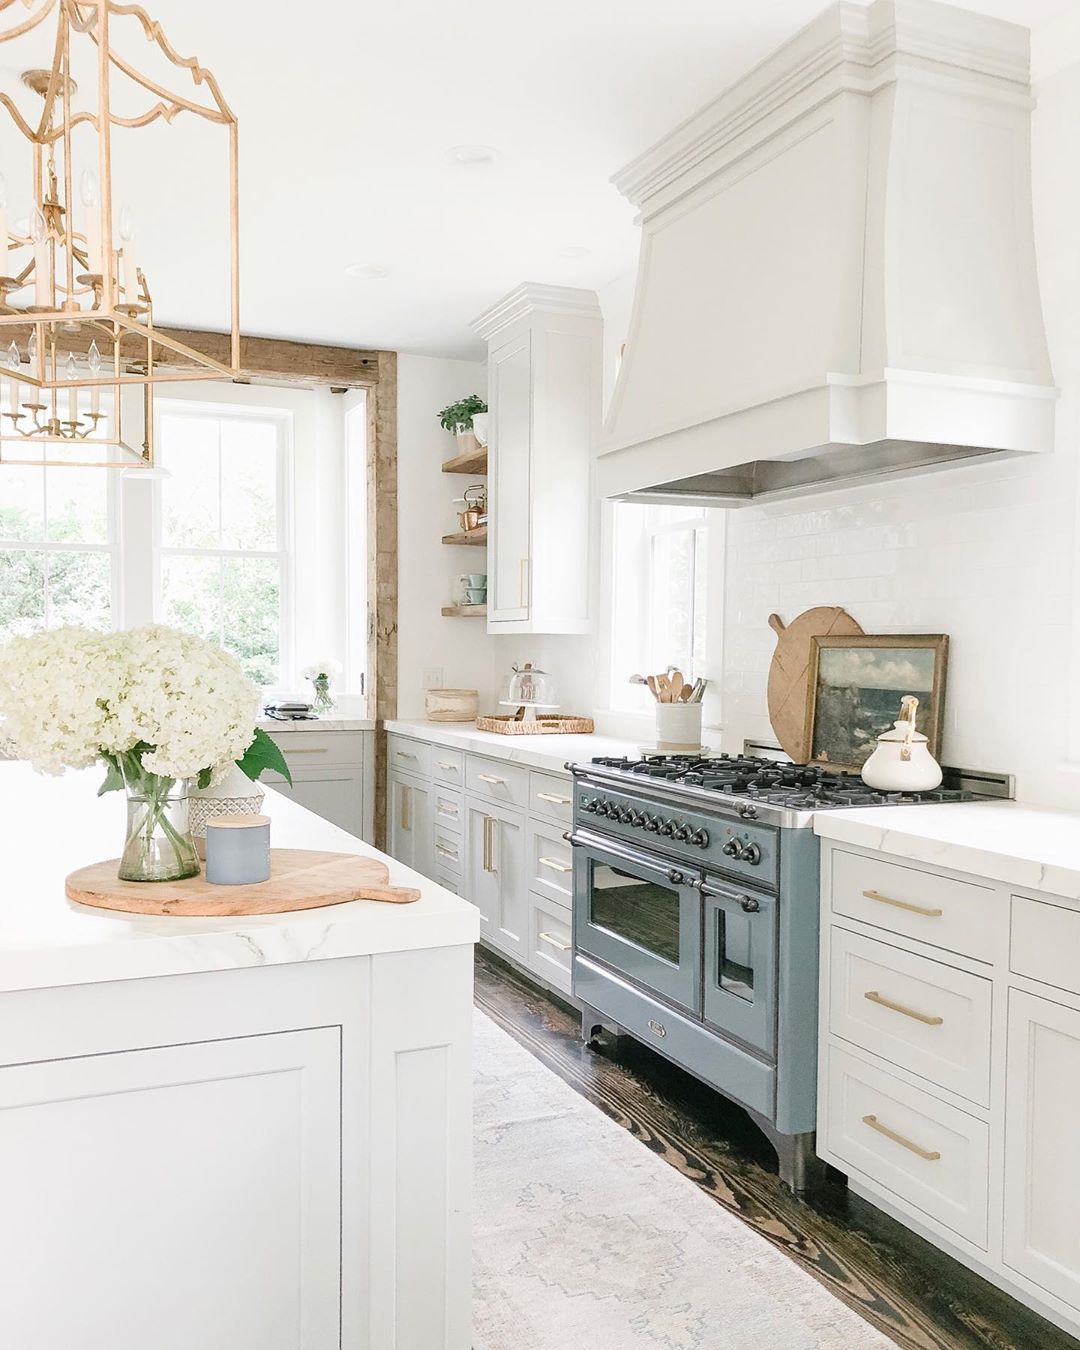 Clean white luxury kitchen. Photo by Instagram user @finding_lovely